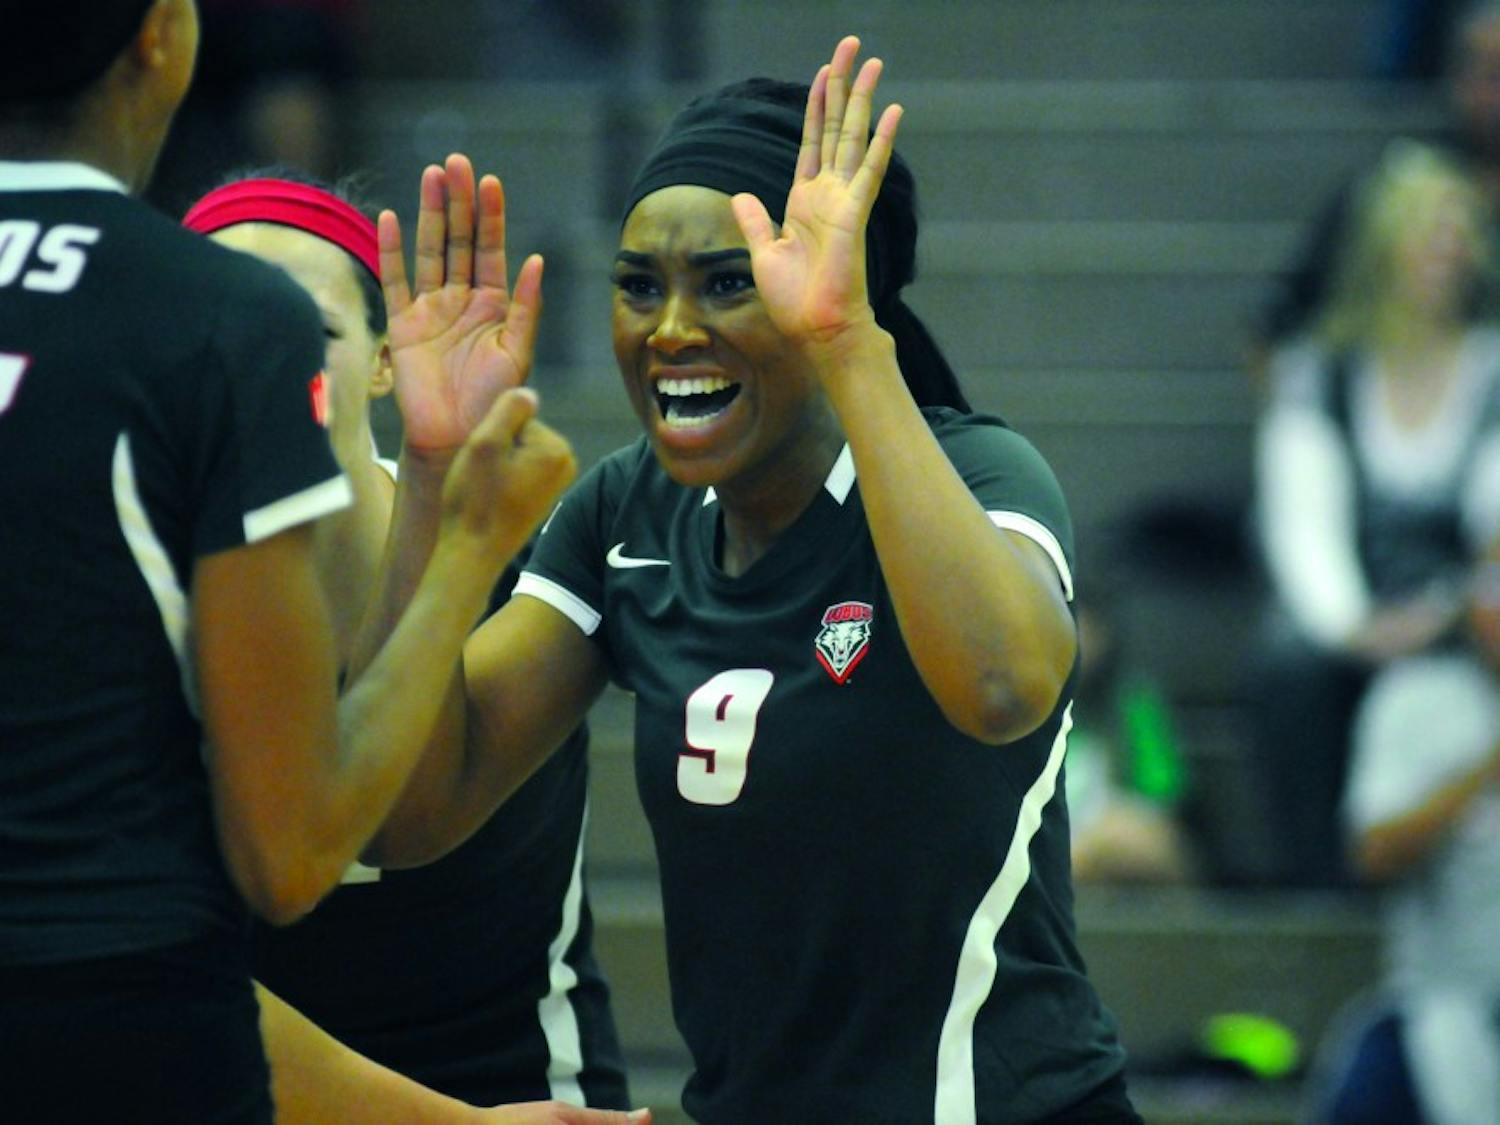 Simone Henderson congratulates her teammates during their game against San Jose State Oct. 25, 2014. Henderson had 21 kills in Saturday’s game against Ball State as the Lobos went 2-1 in three matches at the Ball State Active Ankle Challenge.